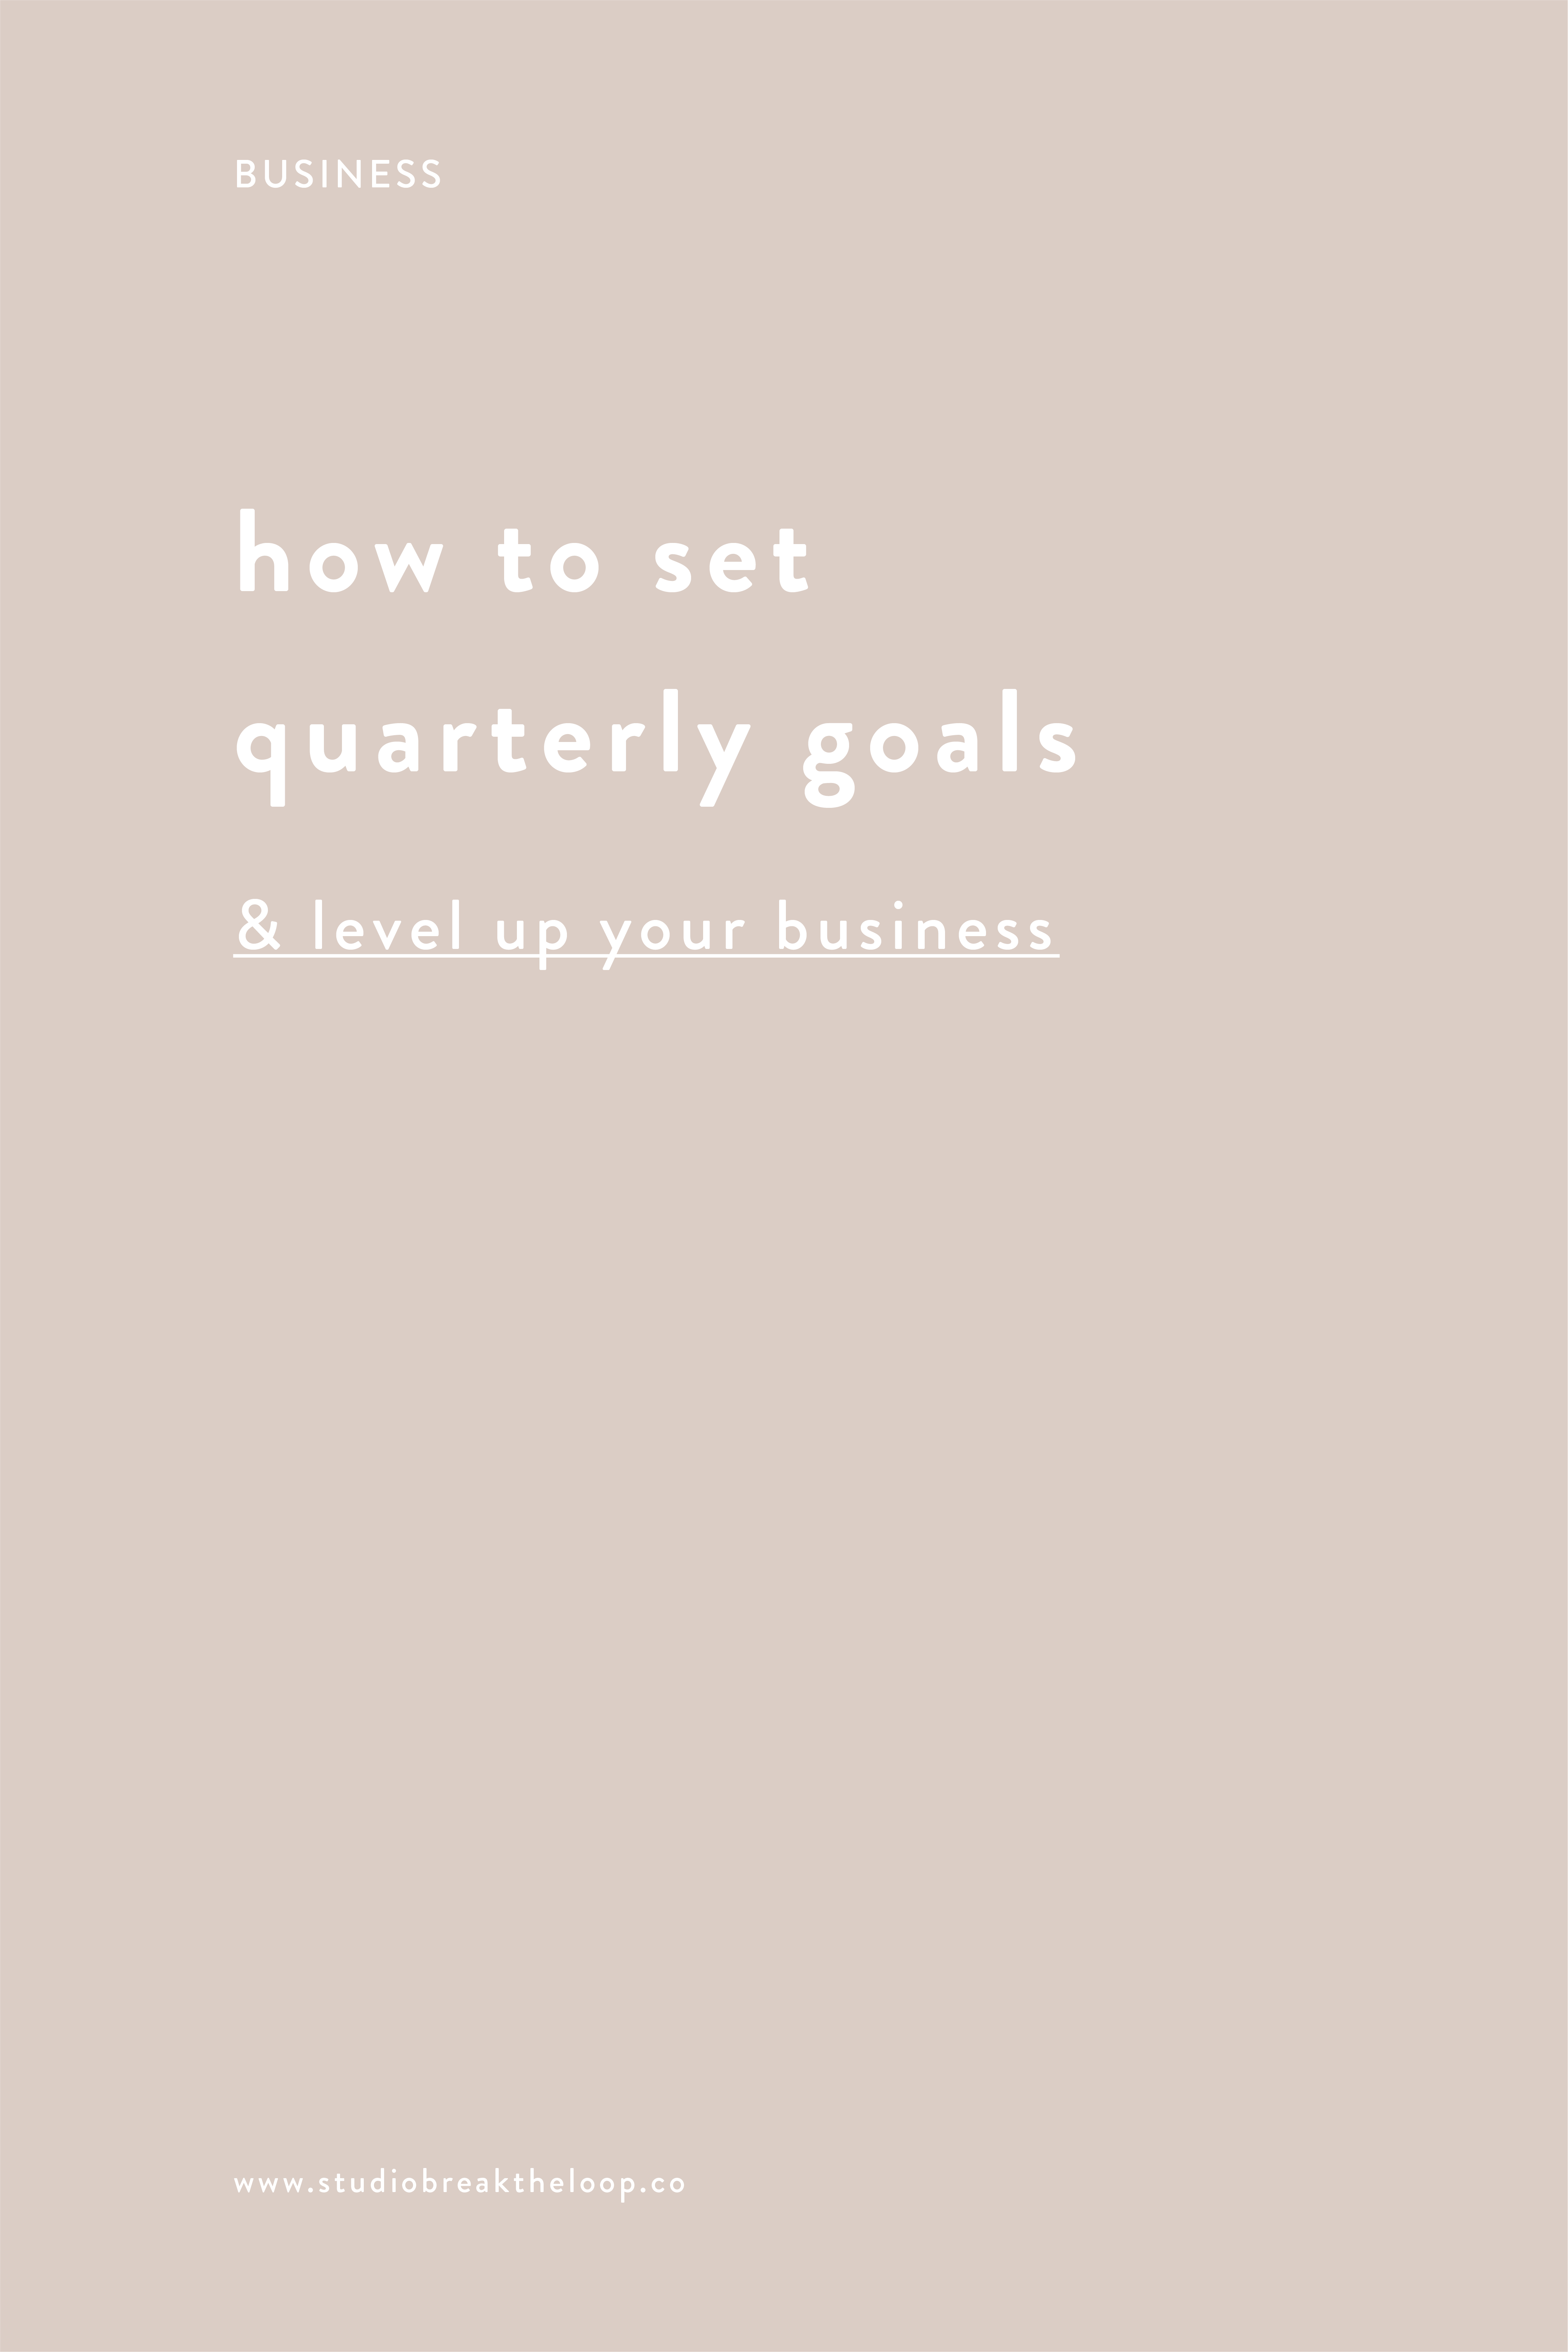 How to set quarterly goals for your business